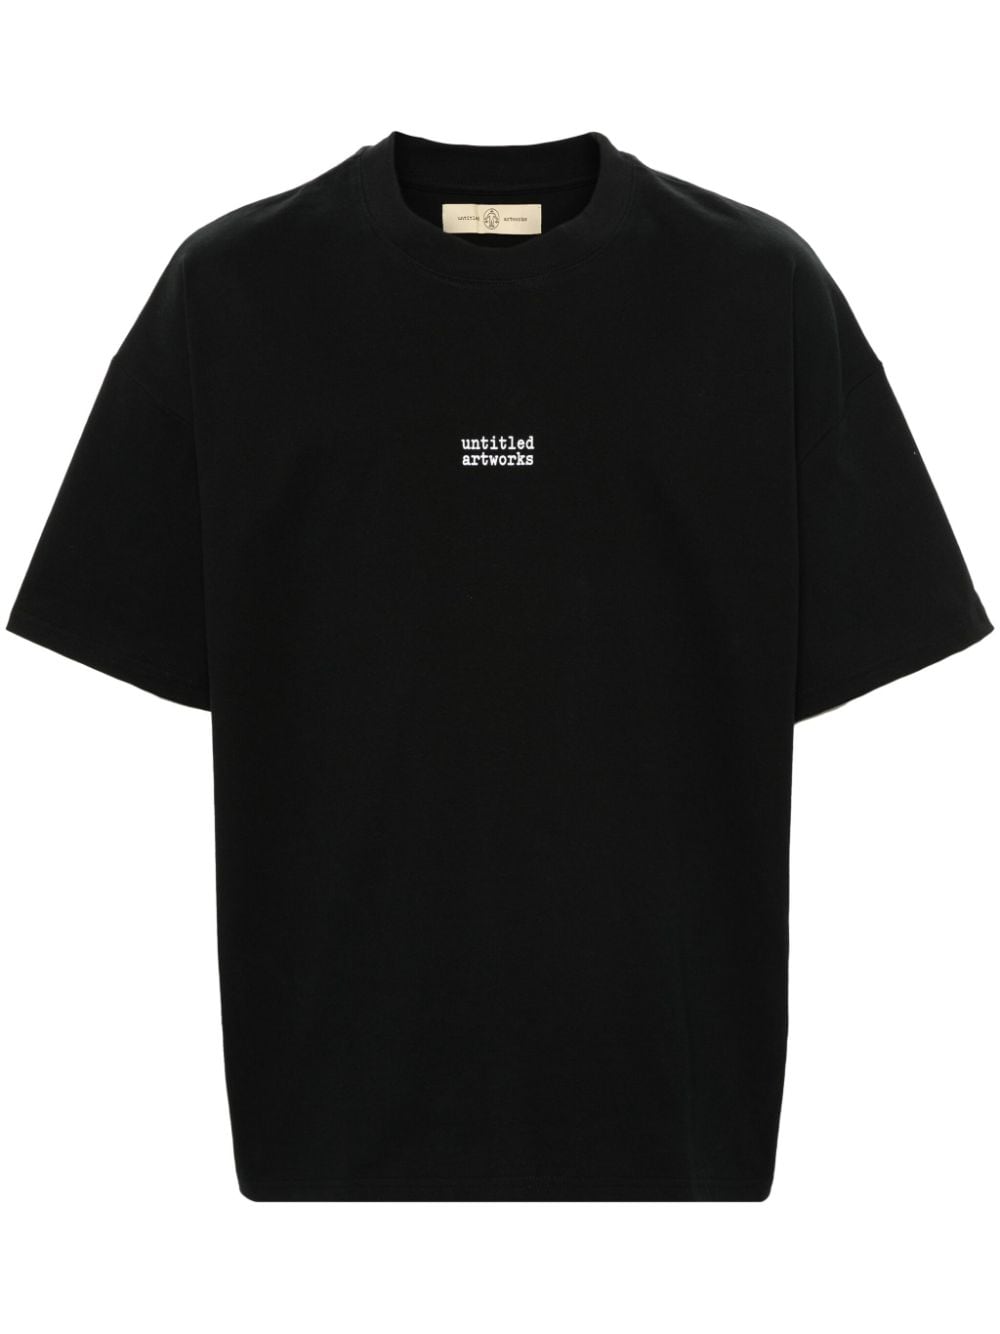 Shop Untitled Artworks Tee Essential Cotton T-shirt In Black